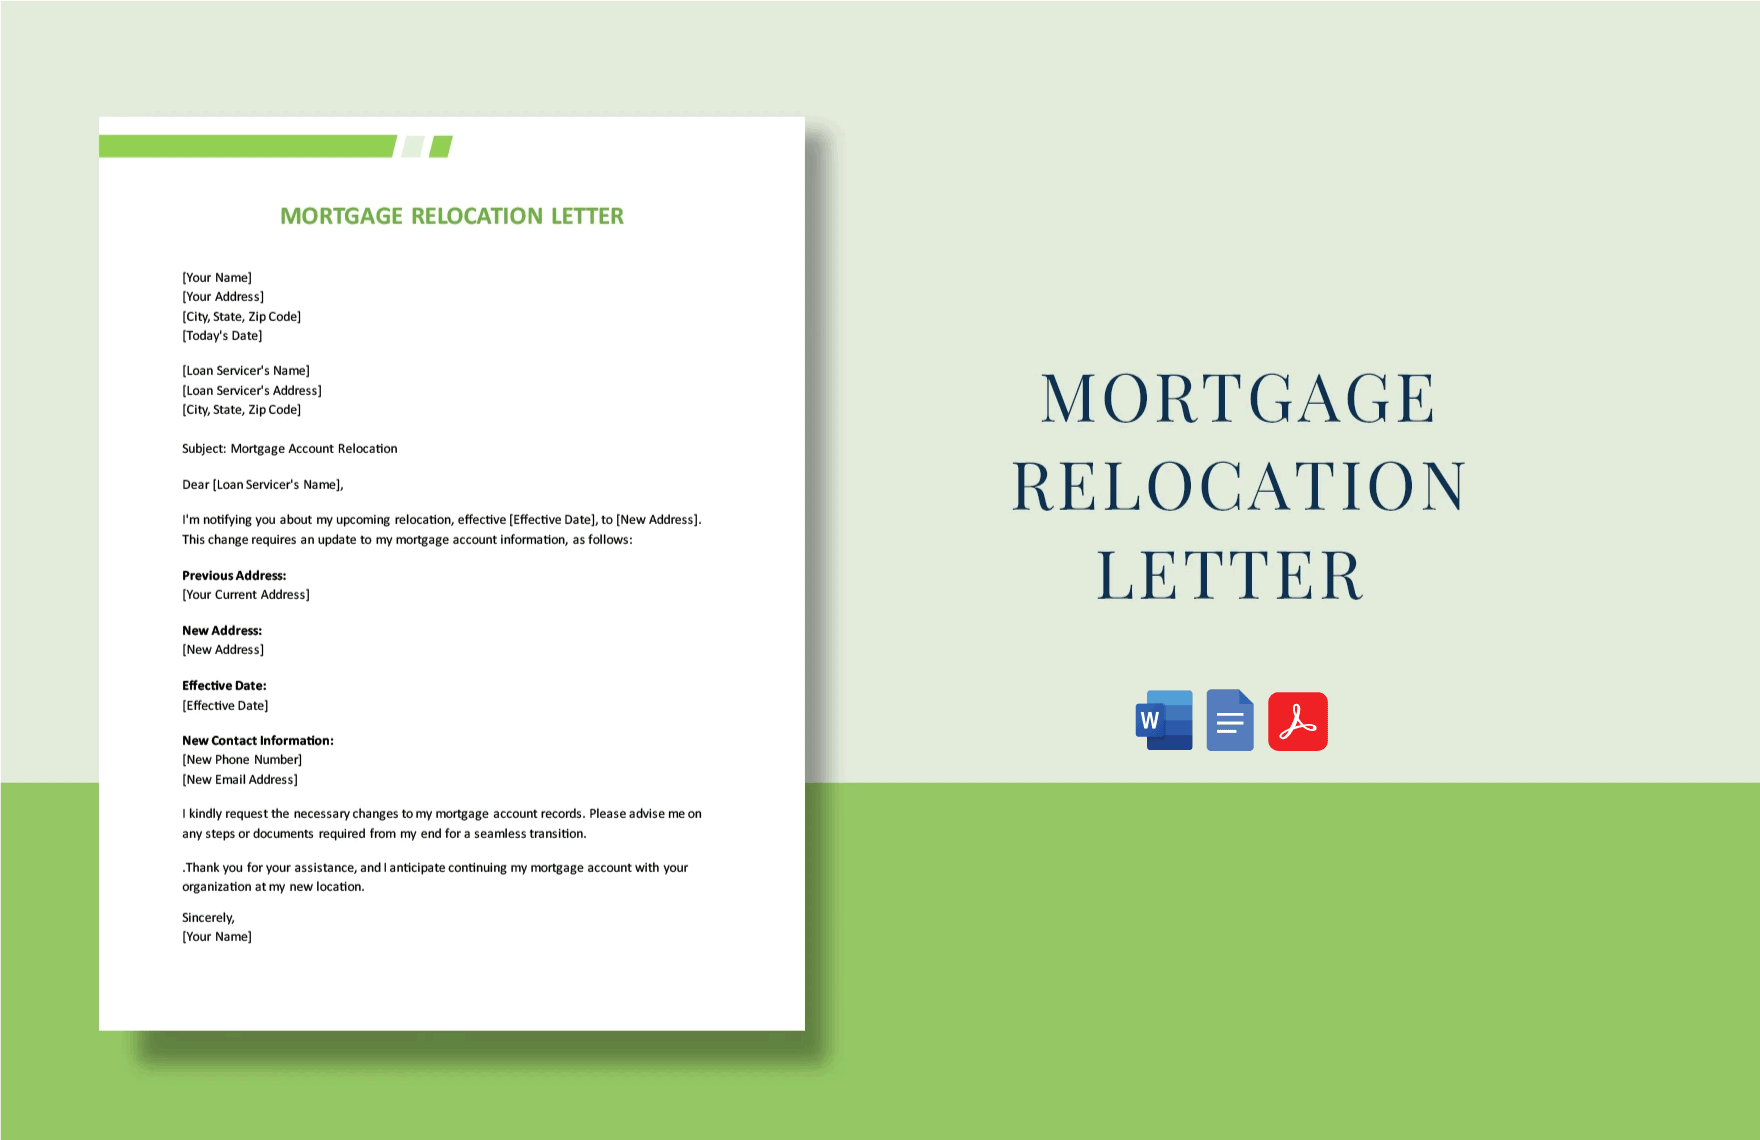 Mortgage Relocation Letter in Word, Google Docs, PDF